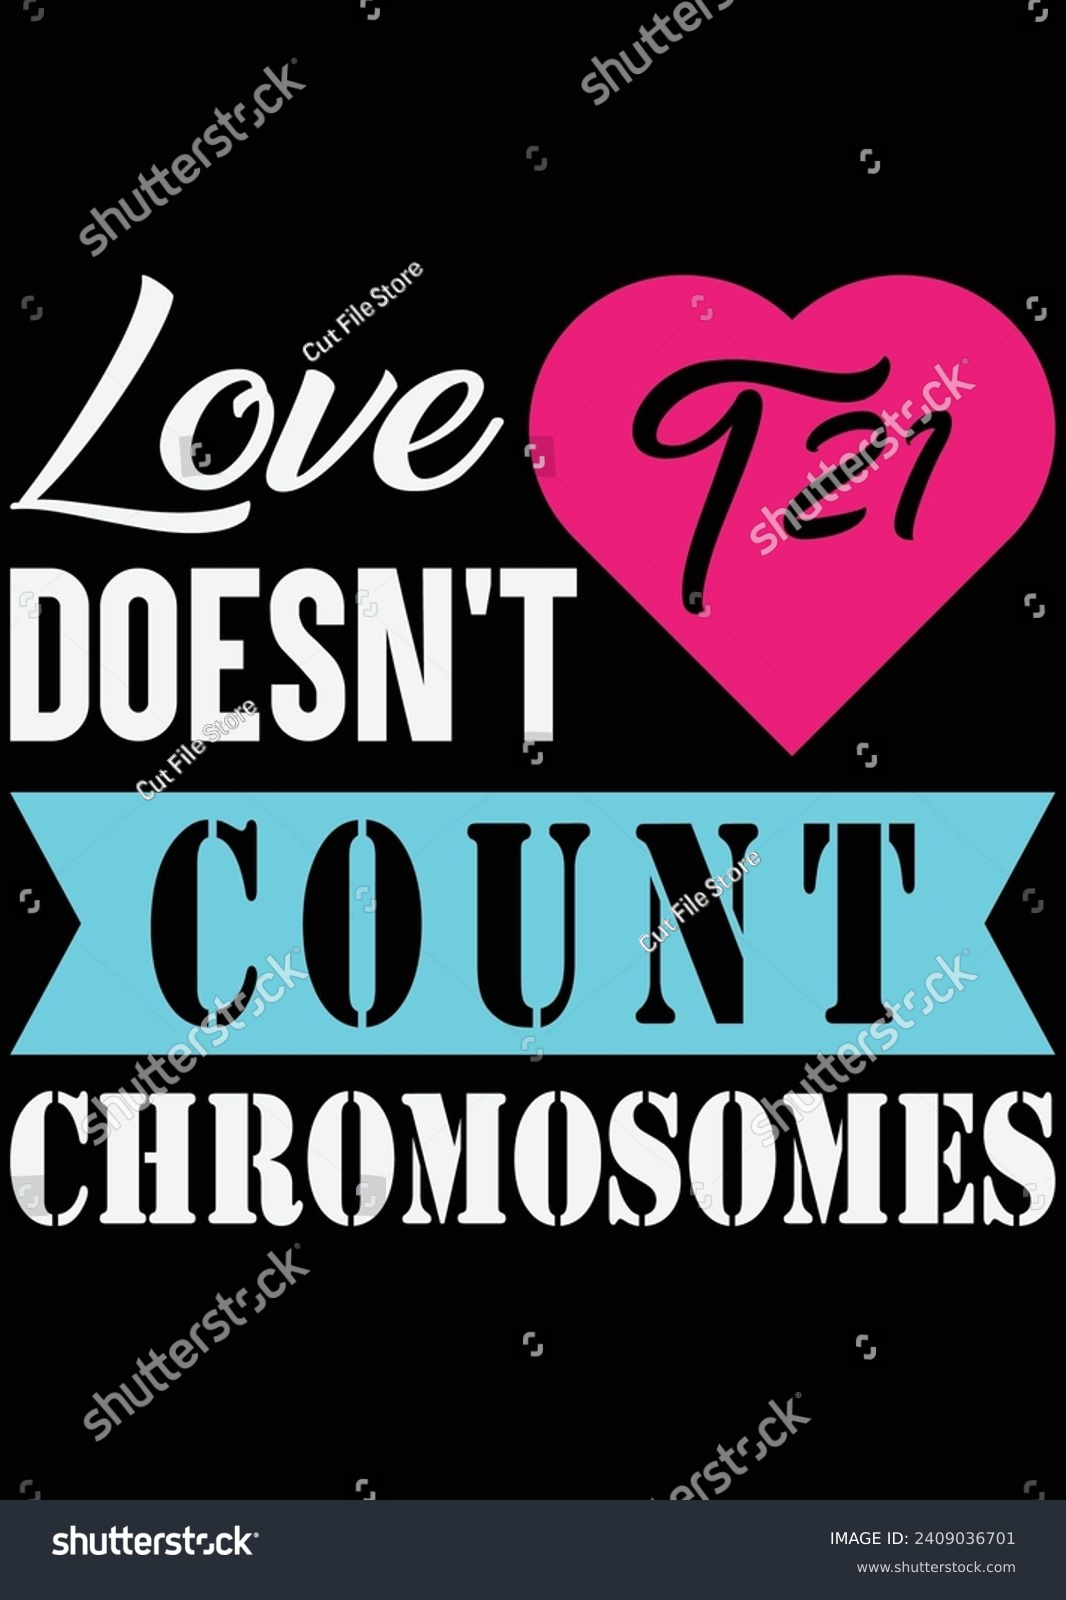 SVG of Love Doesn't Count Chromosomes eps cut file for cutting machine svg